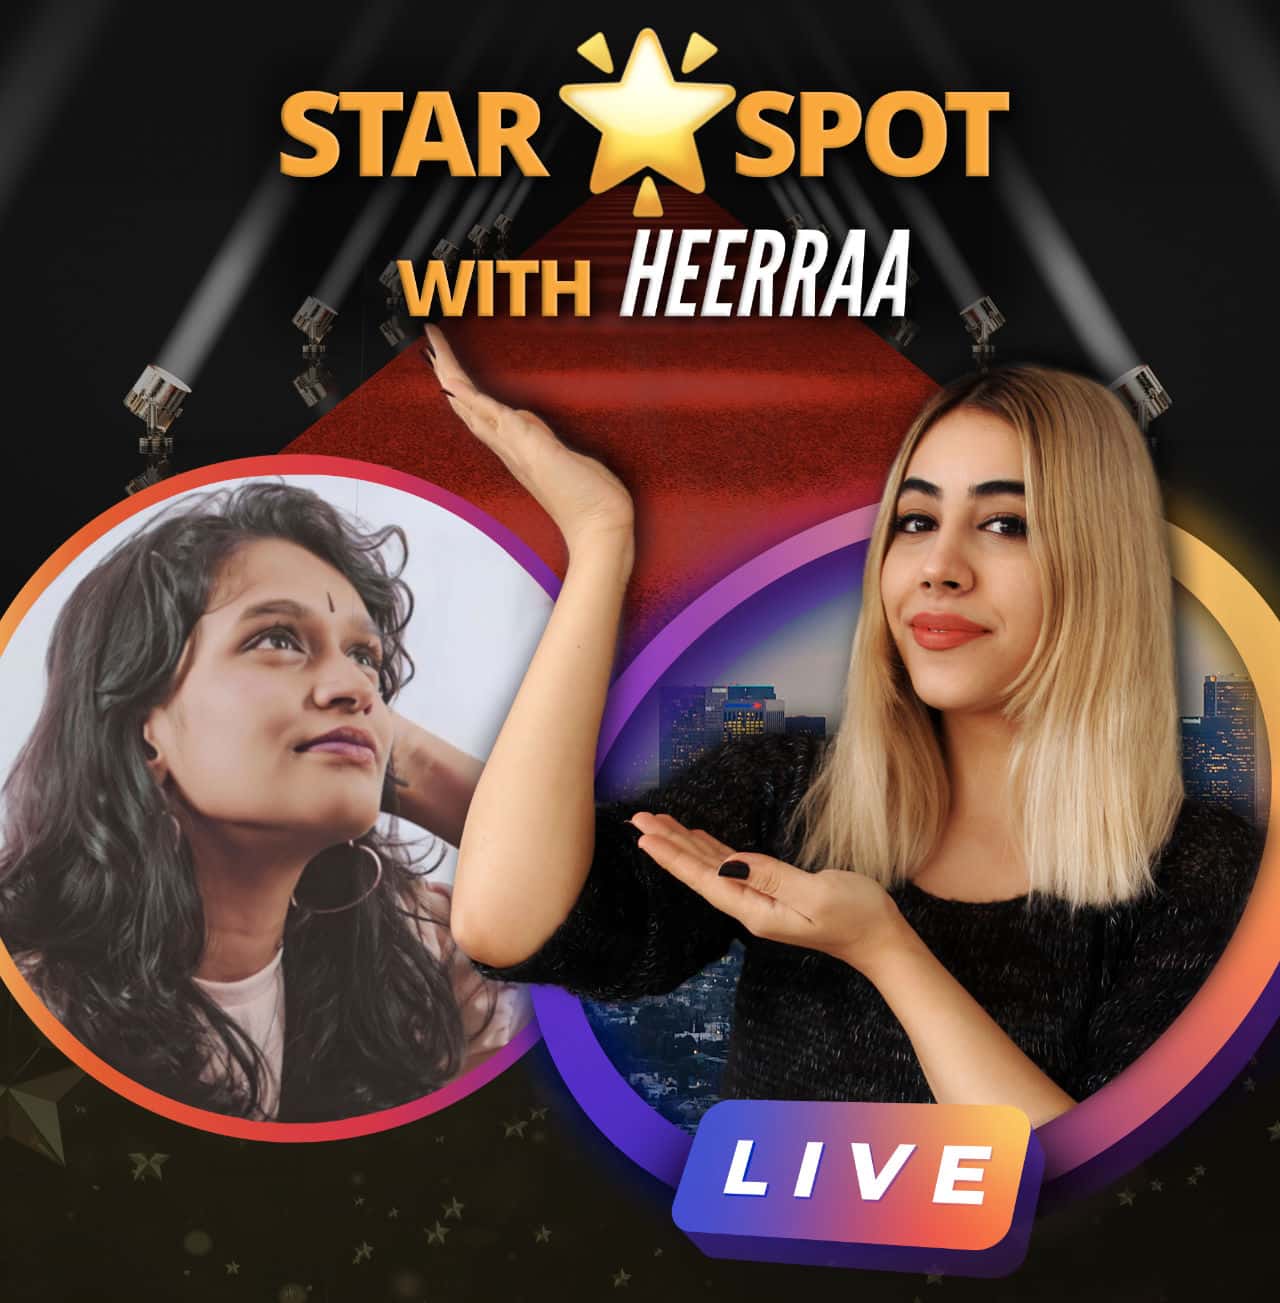 Promotional cover art of Star Spot with Heerraa